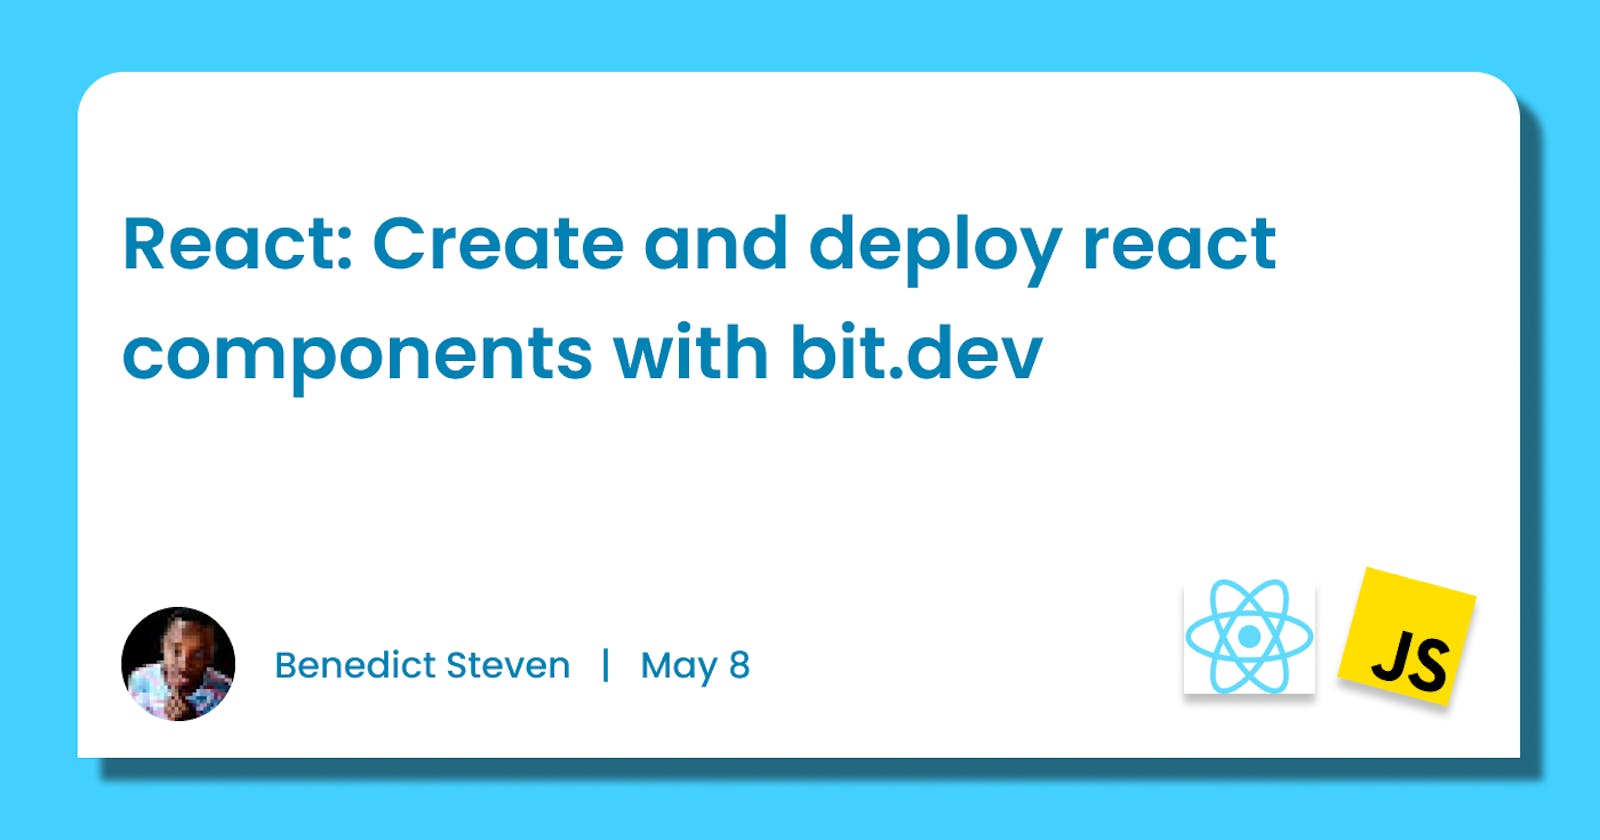 Create and deploy react components with bit.dev